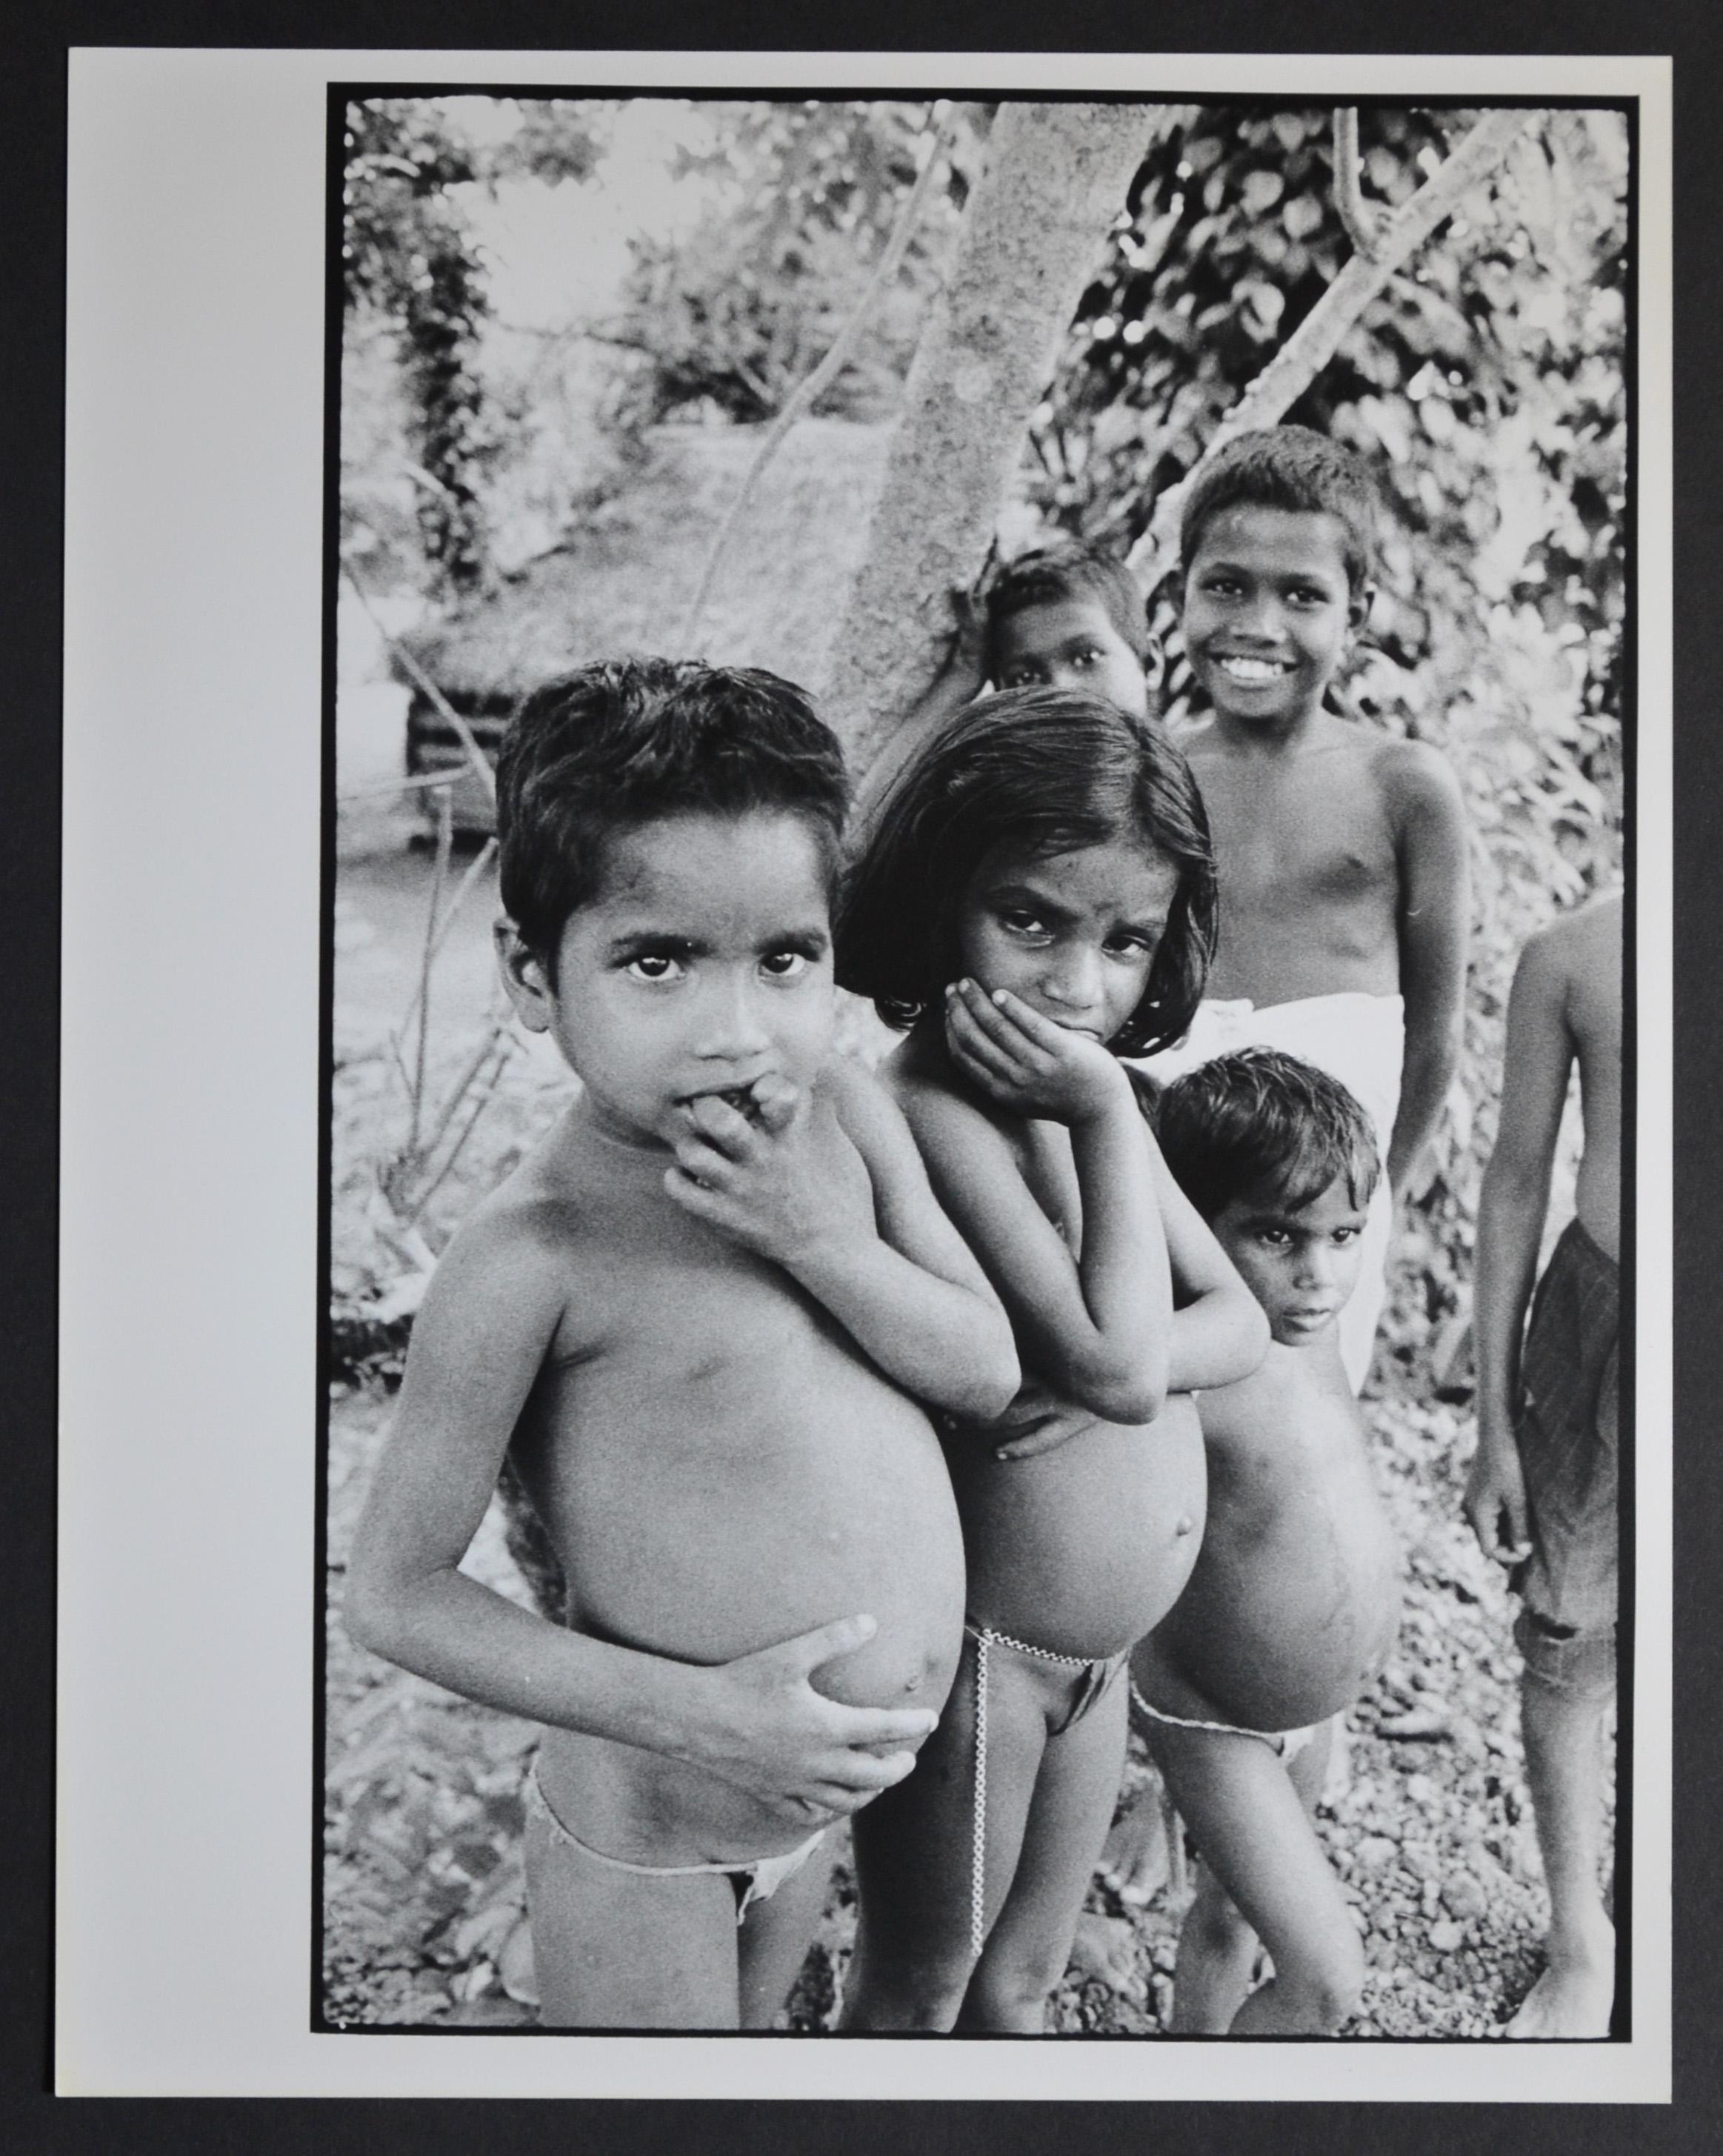 Rolf Gillhausen Black and White Photograph - Undernourished children in India, 1950s - 1960s.